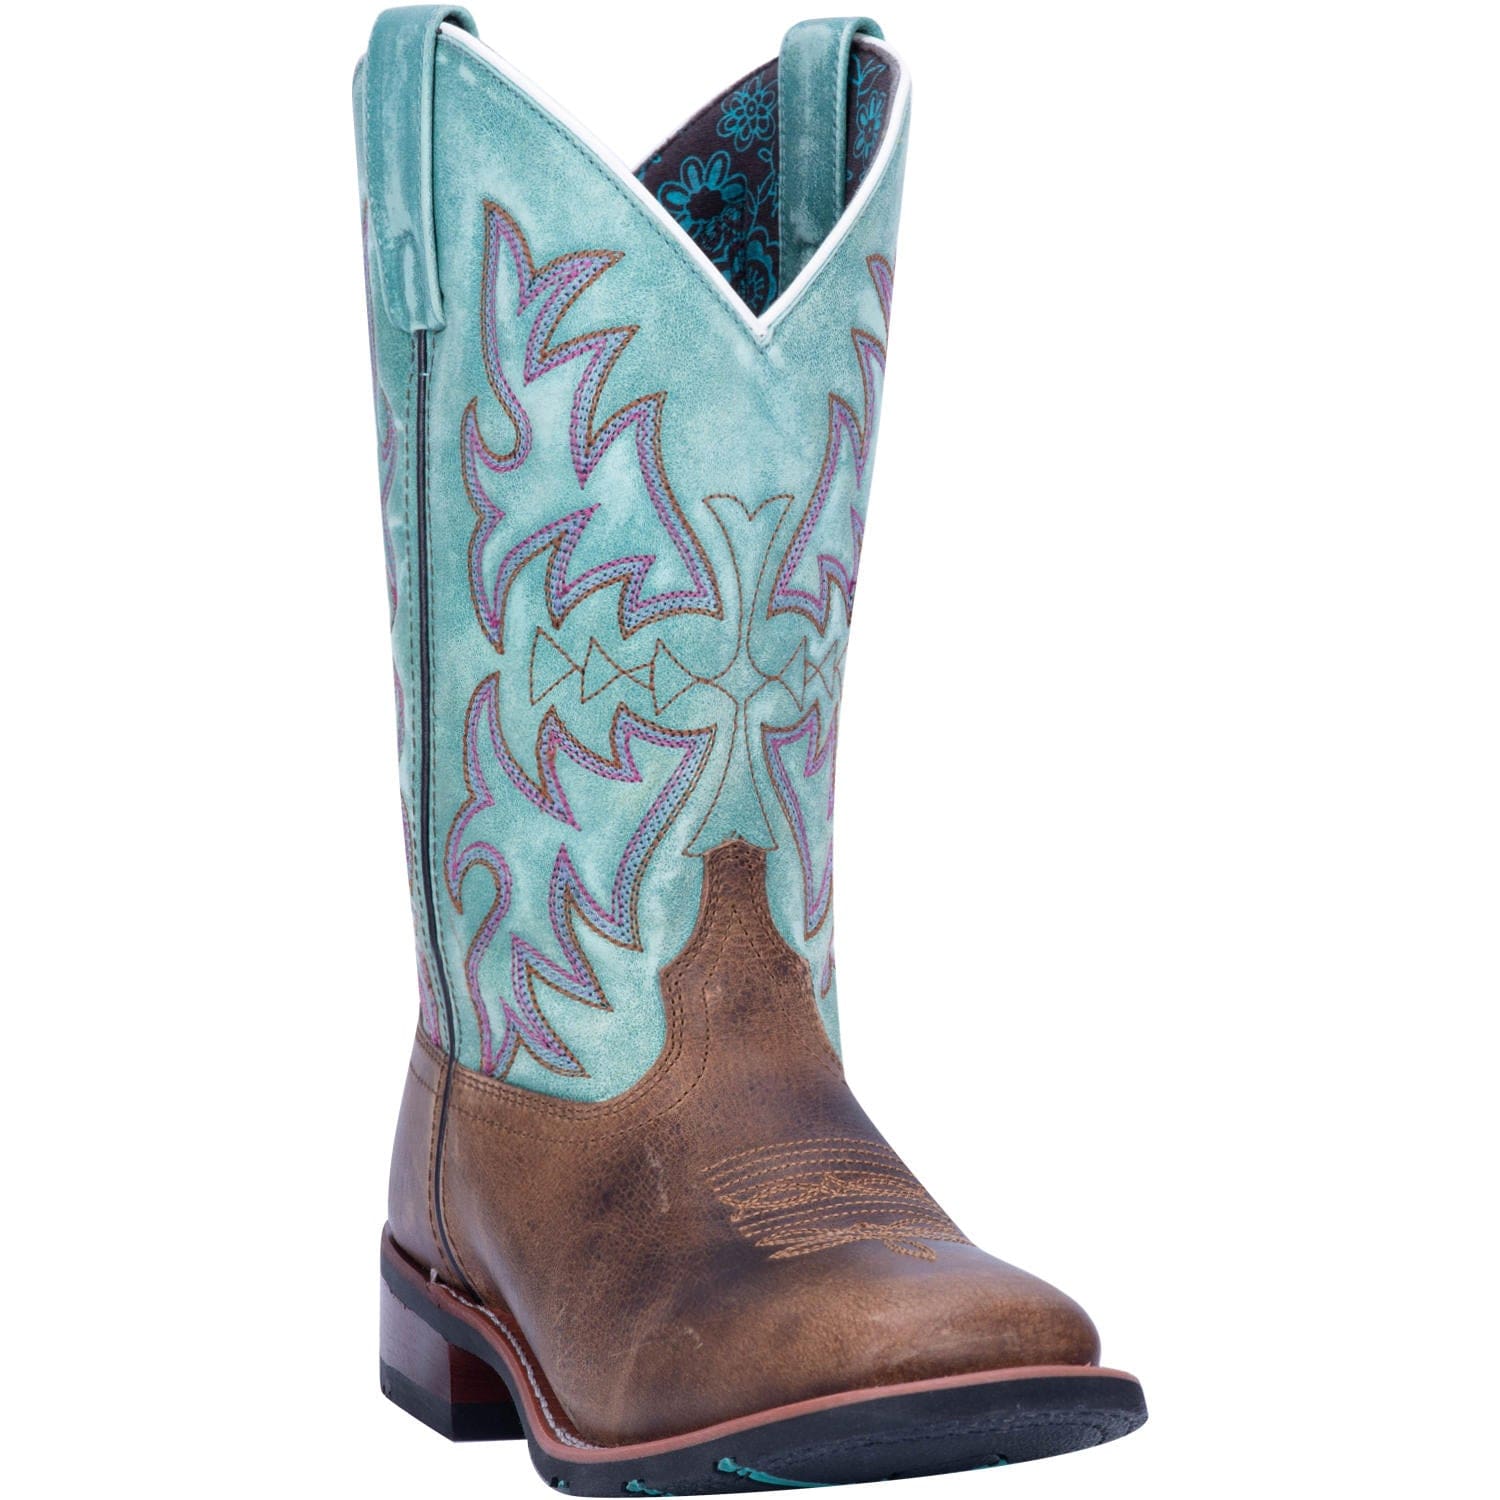 LAREDO Boots Laredo Women's Brown Leather Cowgirl Boots 5607